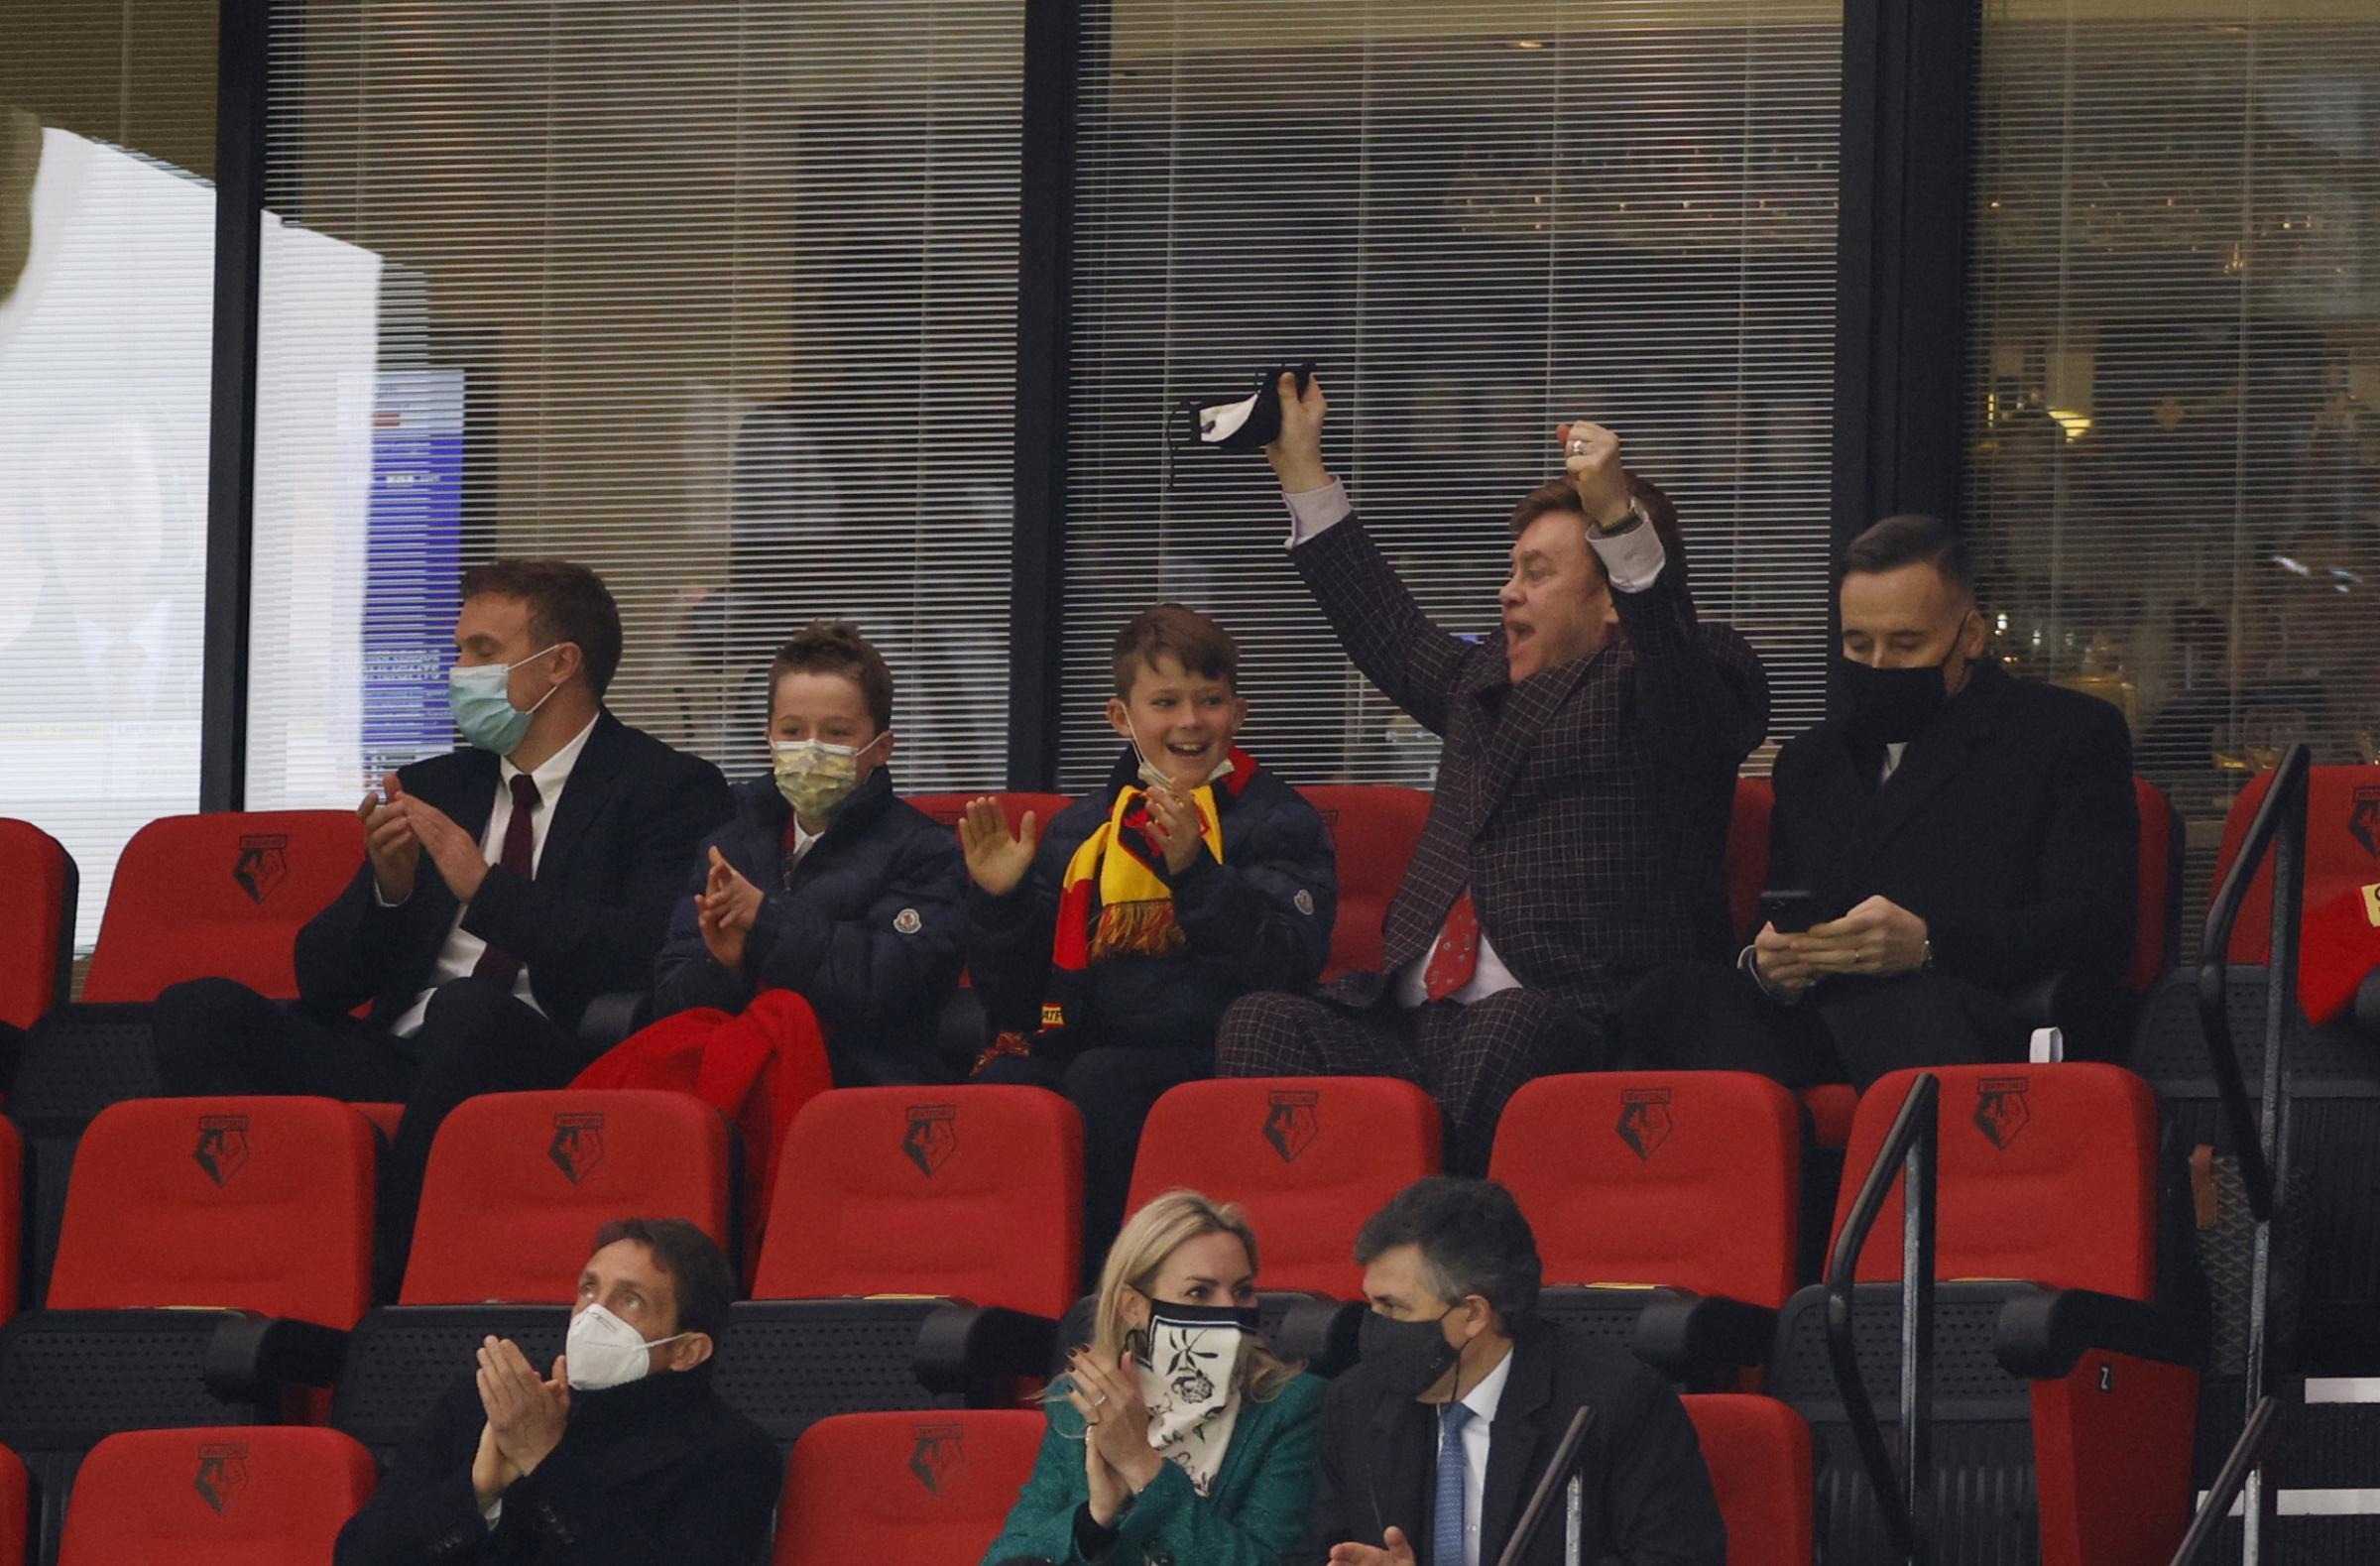 Sir Elton John was spotted at the Watford game (Photo: Action Images)